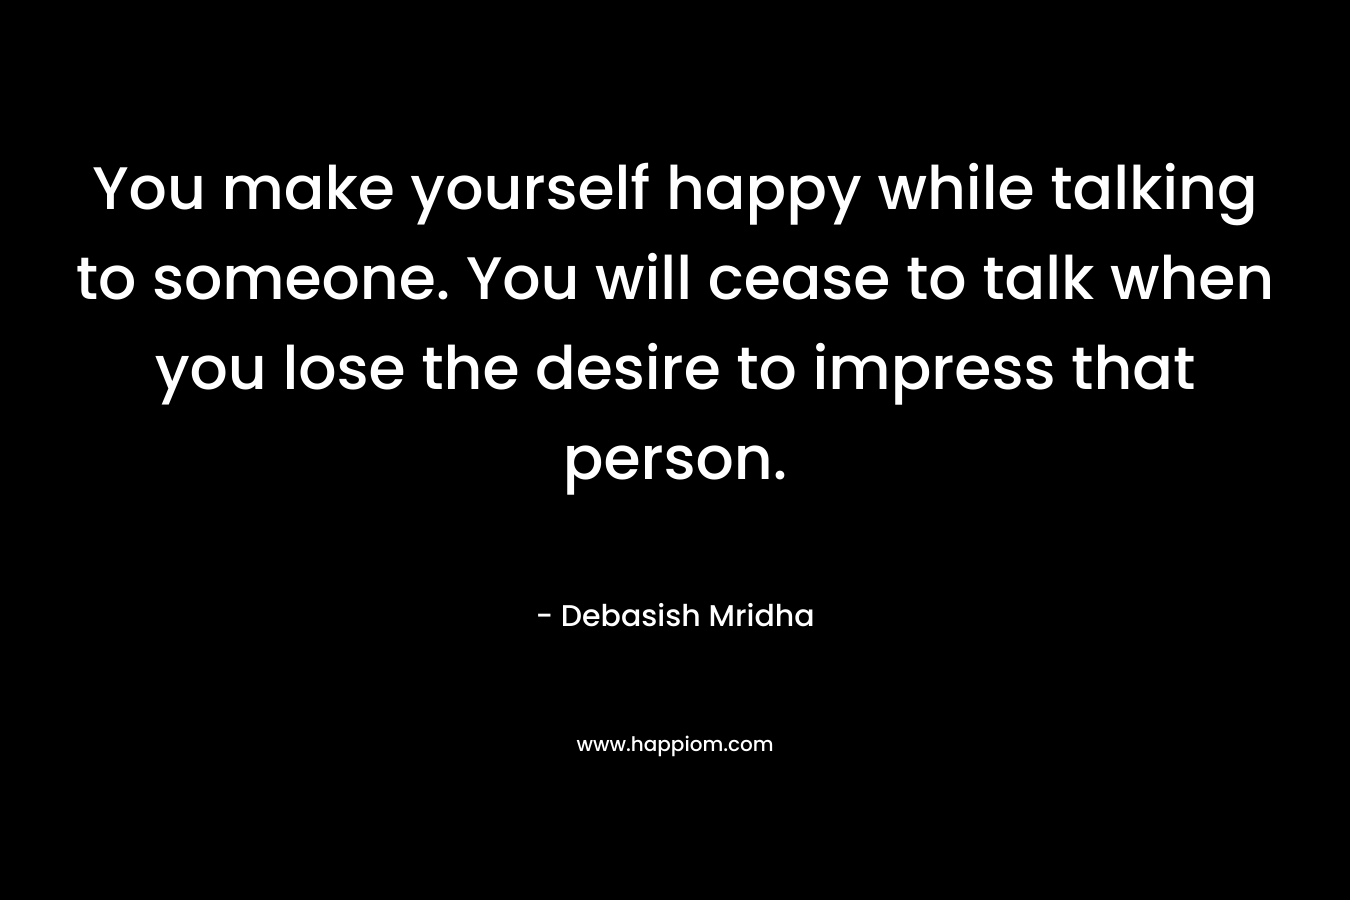 You make yourself happy while talking to someone. You will cease to talk when you lose the desire to impress that person. – Debasish Mridha